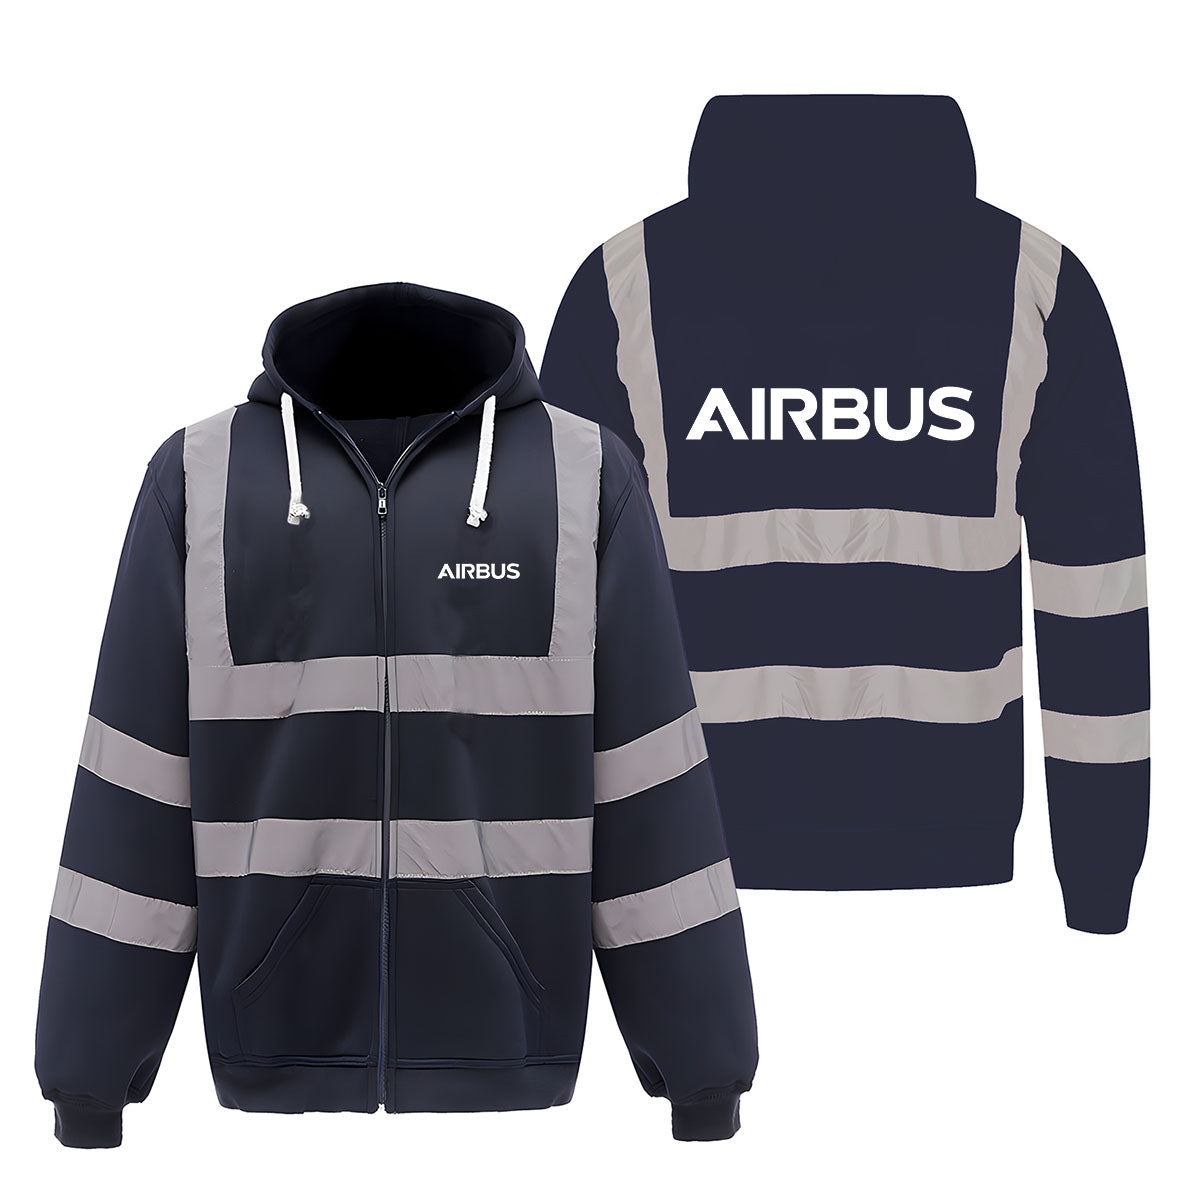 Airbus & Text Designed Reflective Zipped Hoodies